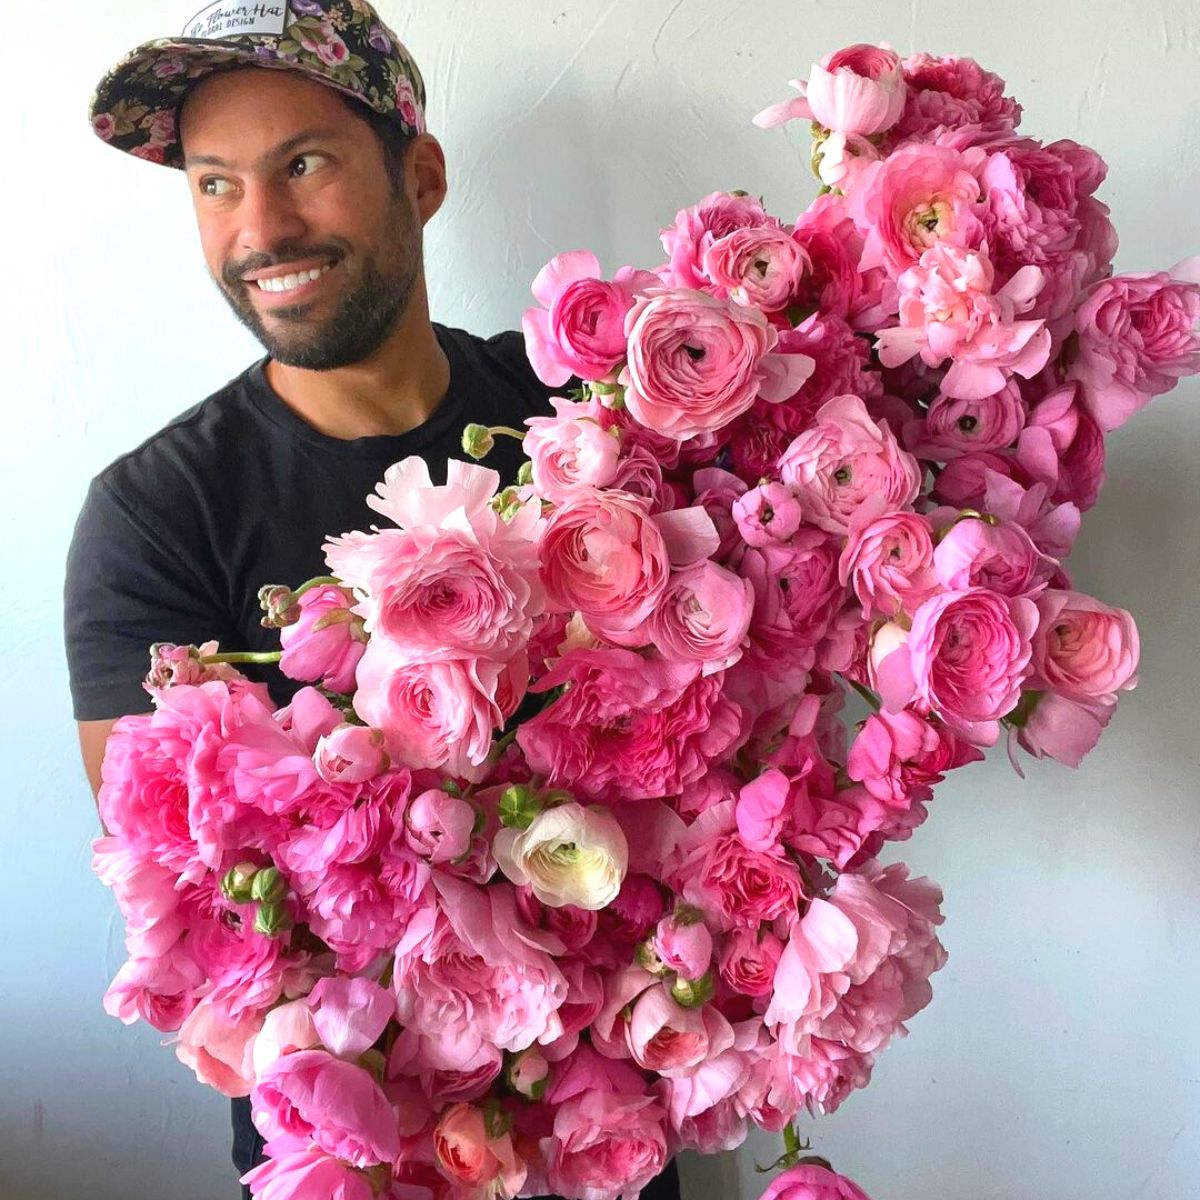 Julio Freitas with an armful of pink flowers